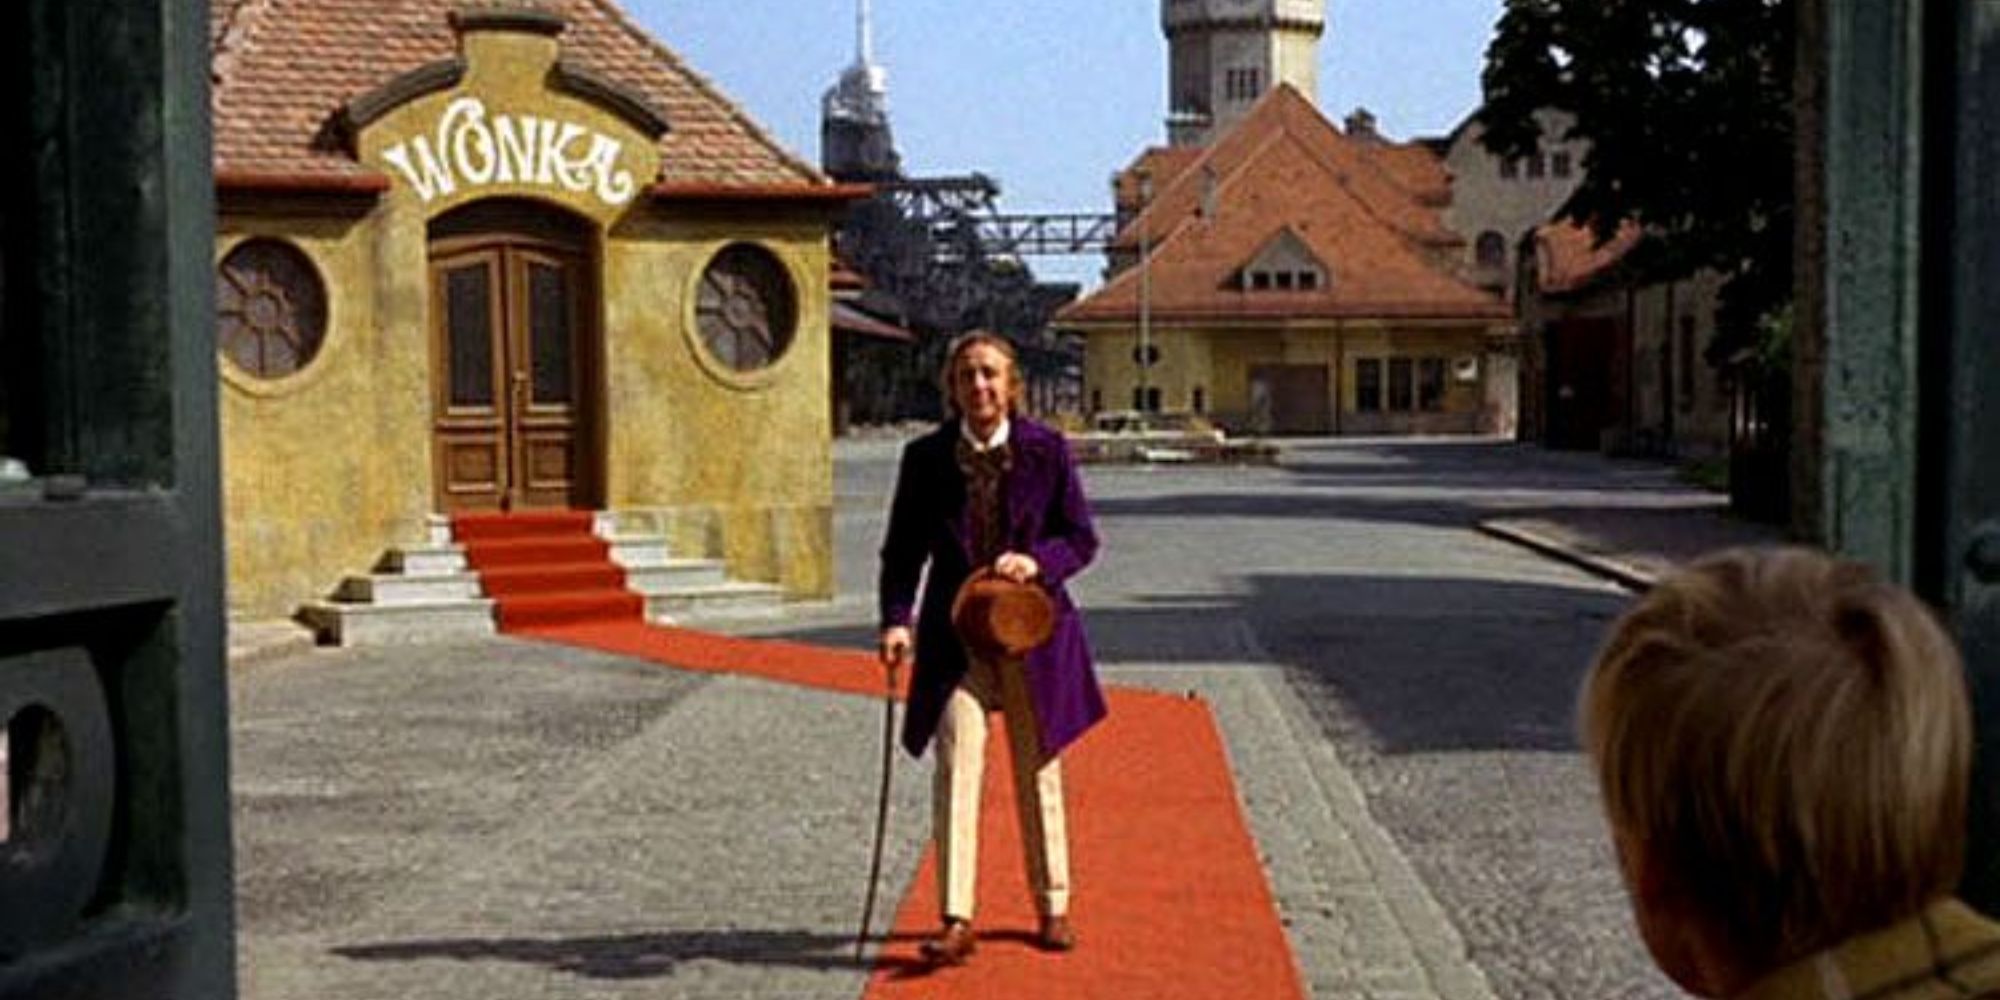 Willy Wonka (Gene Wilder) stands dizzily, moments before dropping into a somersault